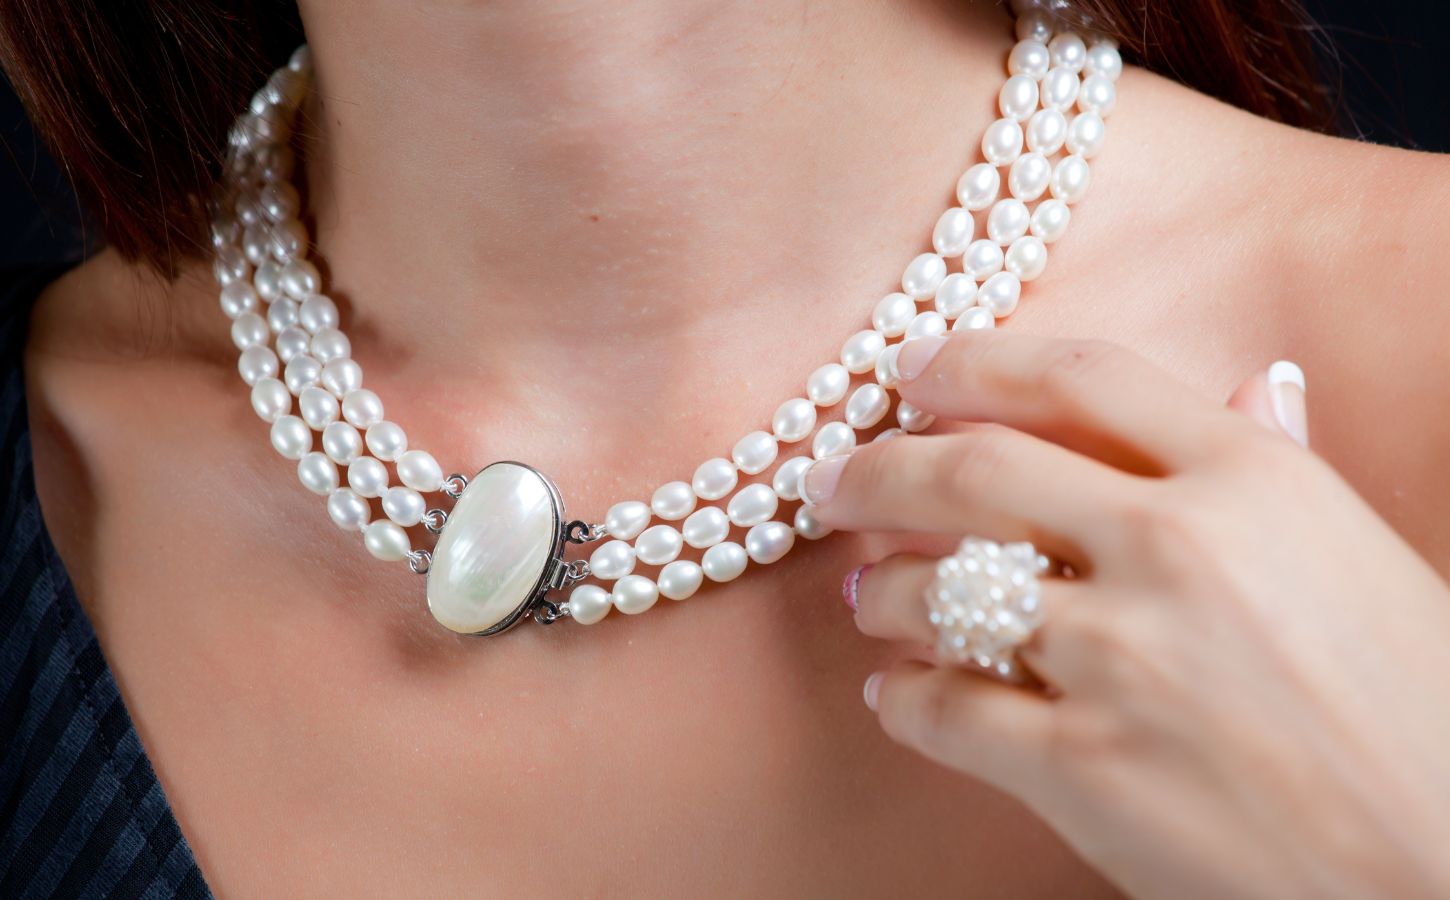 Why Aren't Pearls Vegan? Here's How They're Produced